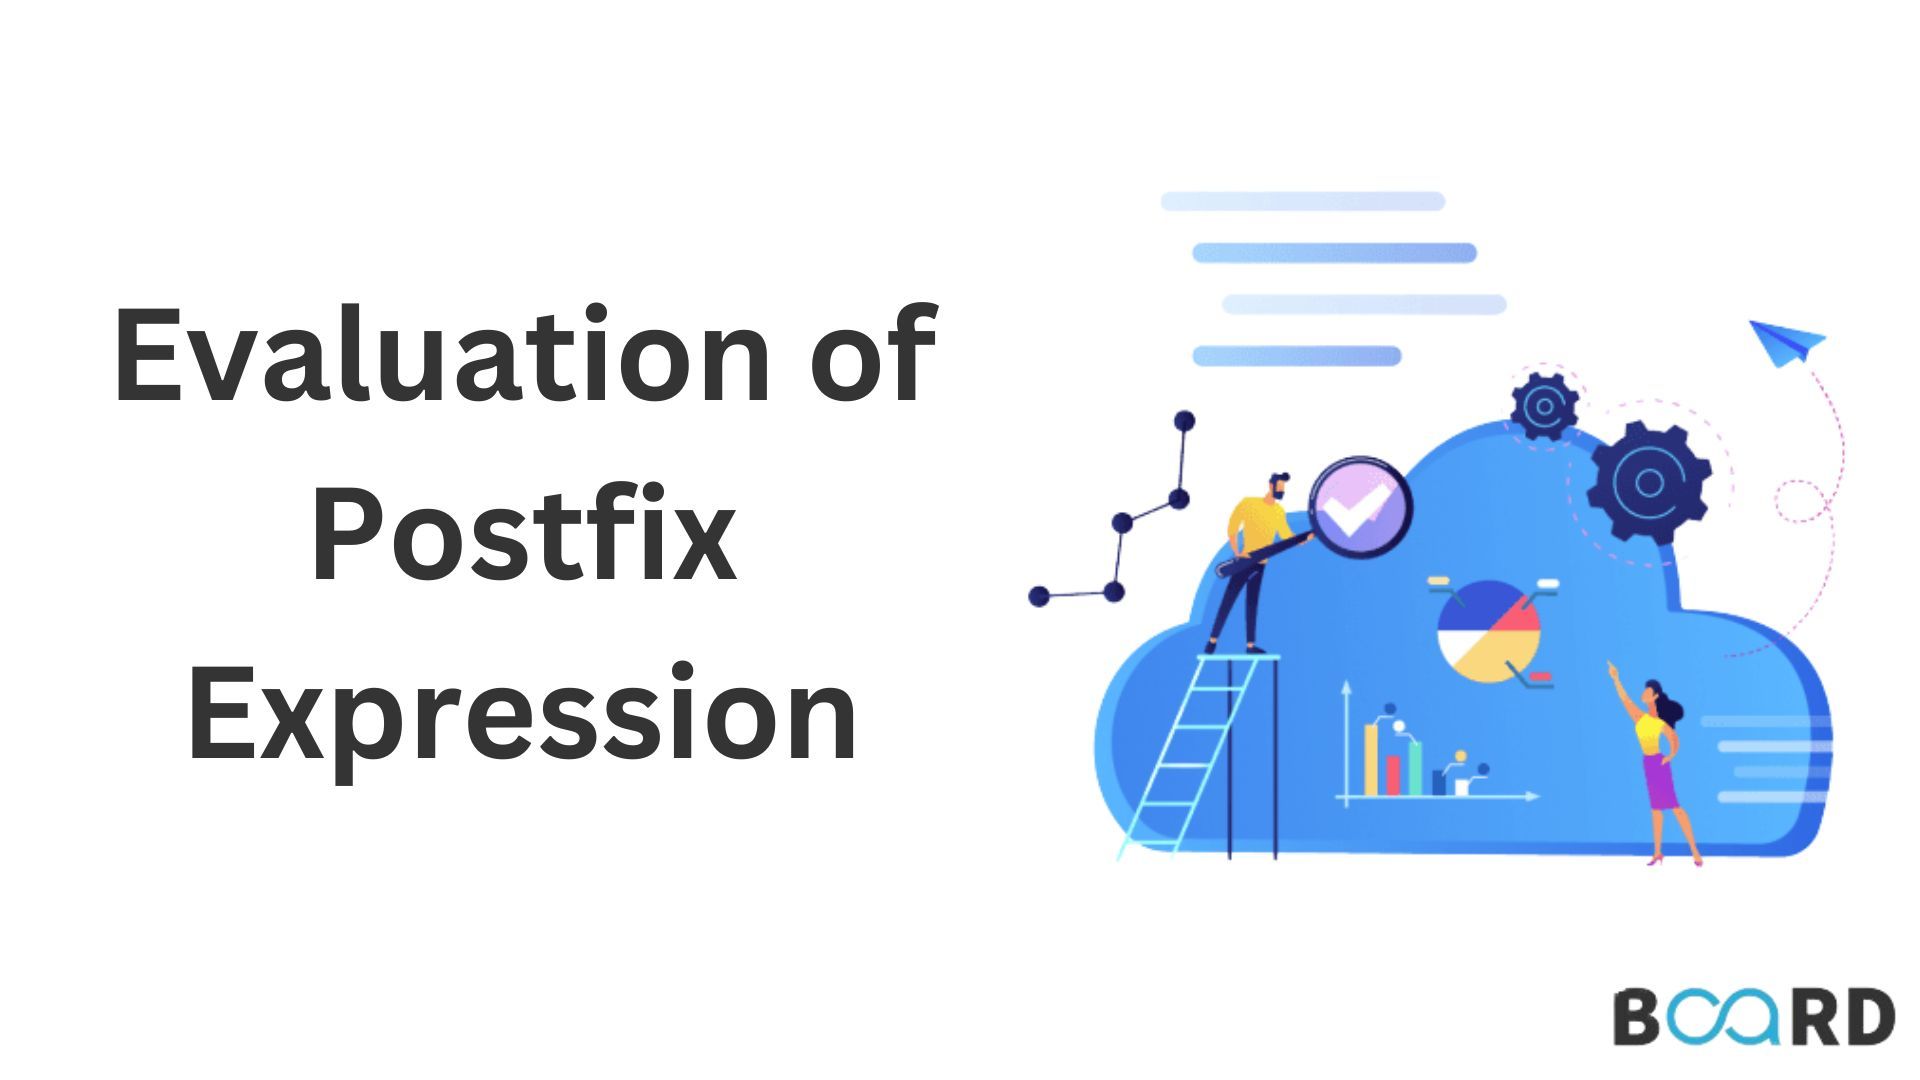 How to Evaluate Postfix Expression